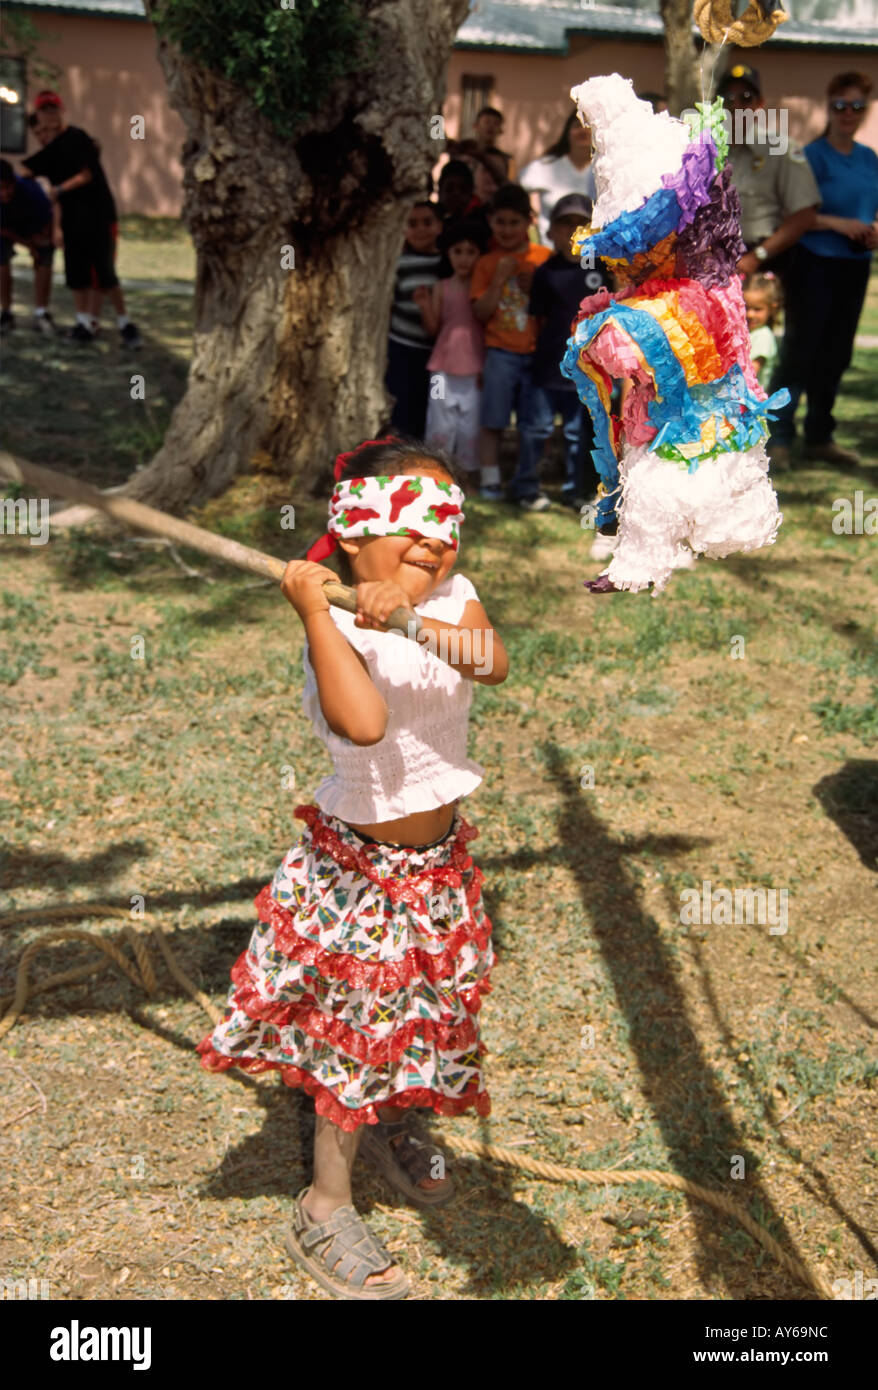 With a mighty swing, a young Hispanic girl tries to break the pinata, at  the Cinco de Mayo fiesta in Carrizozo, New Mexico Stock Photo - Alamy